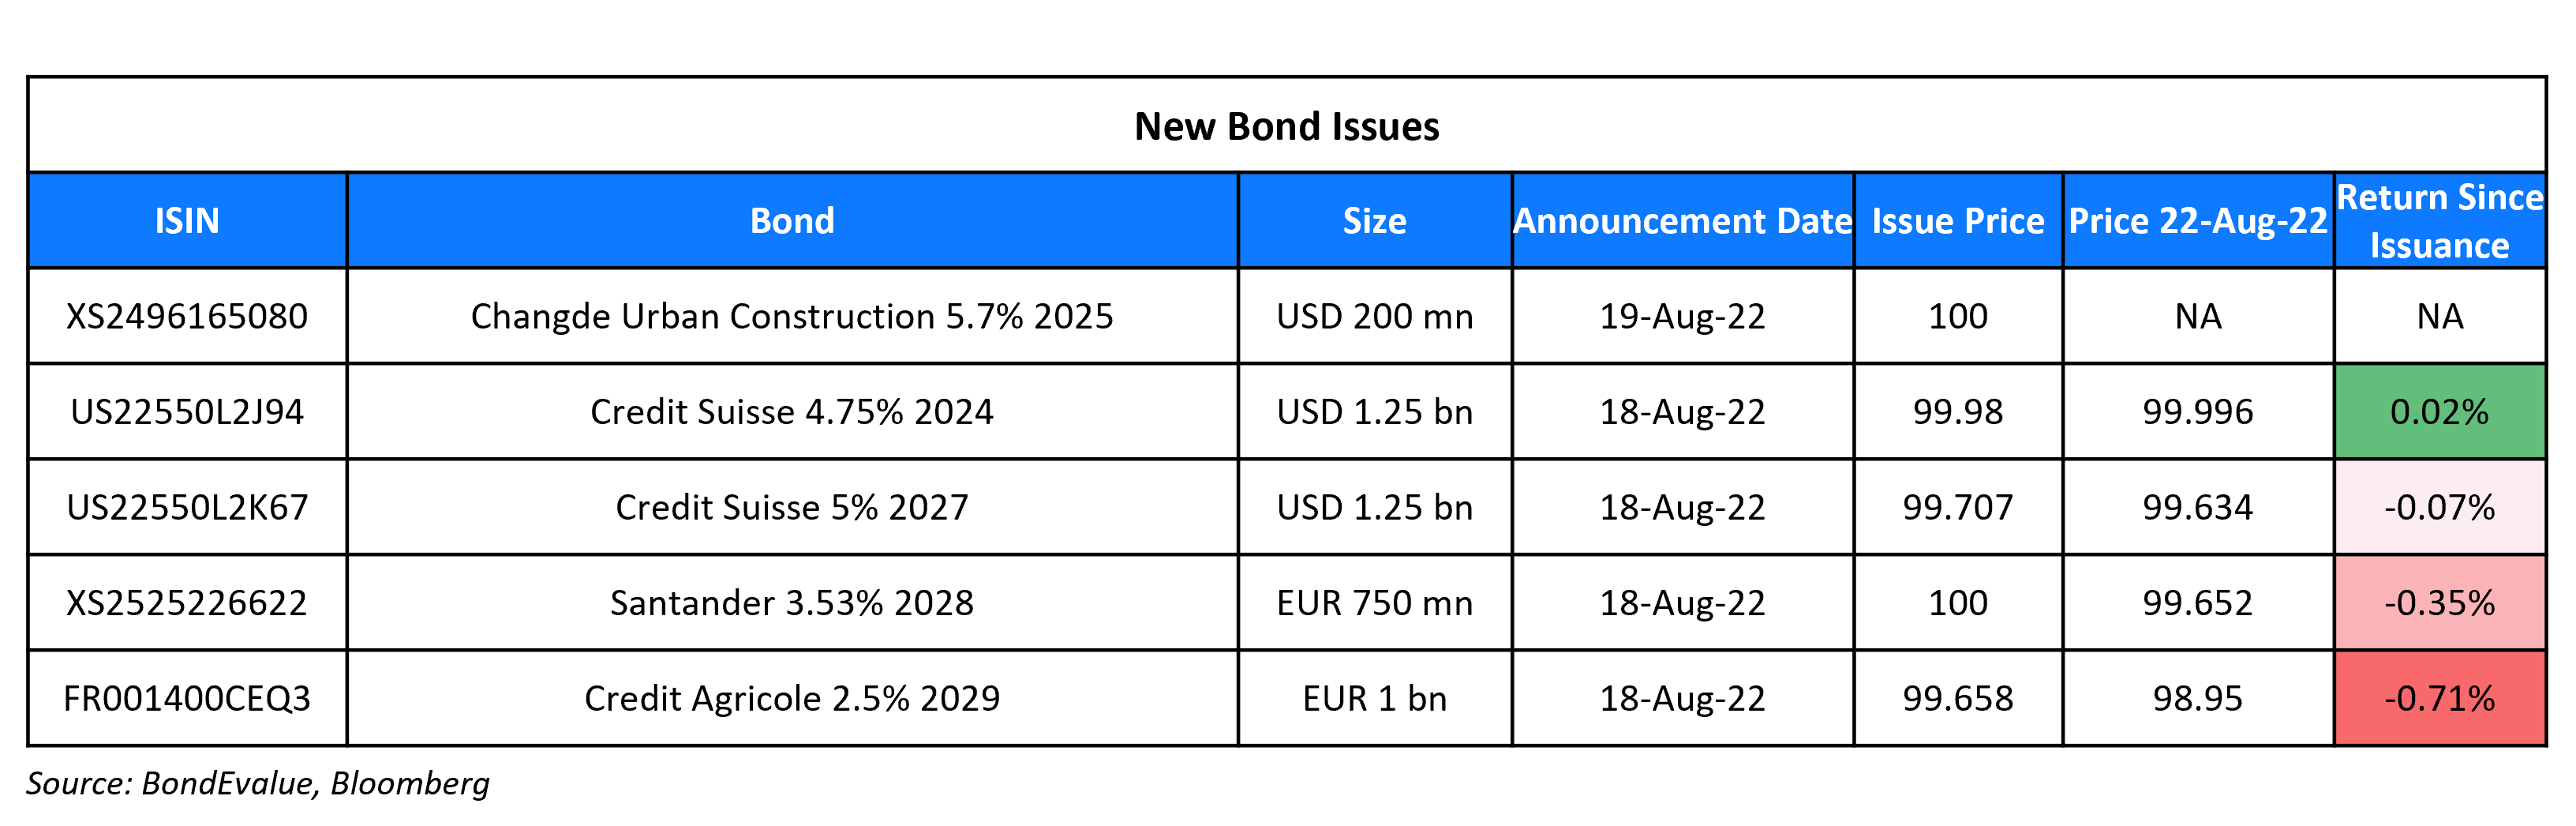 New Bond Issues 22 Aug 22